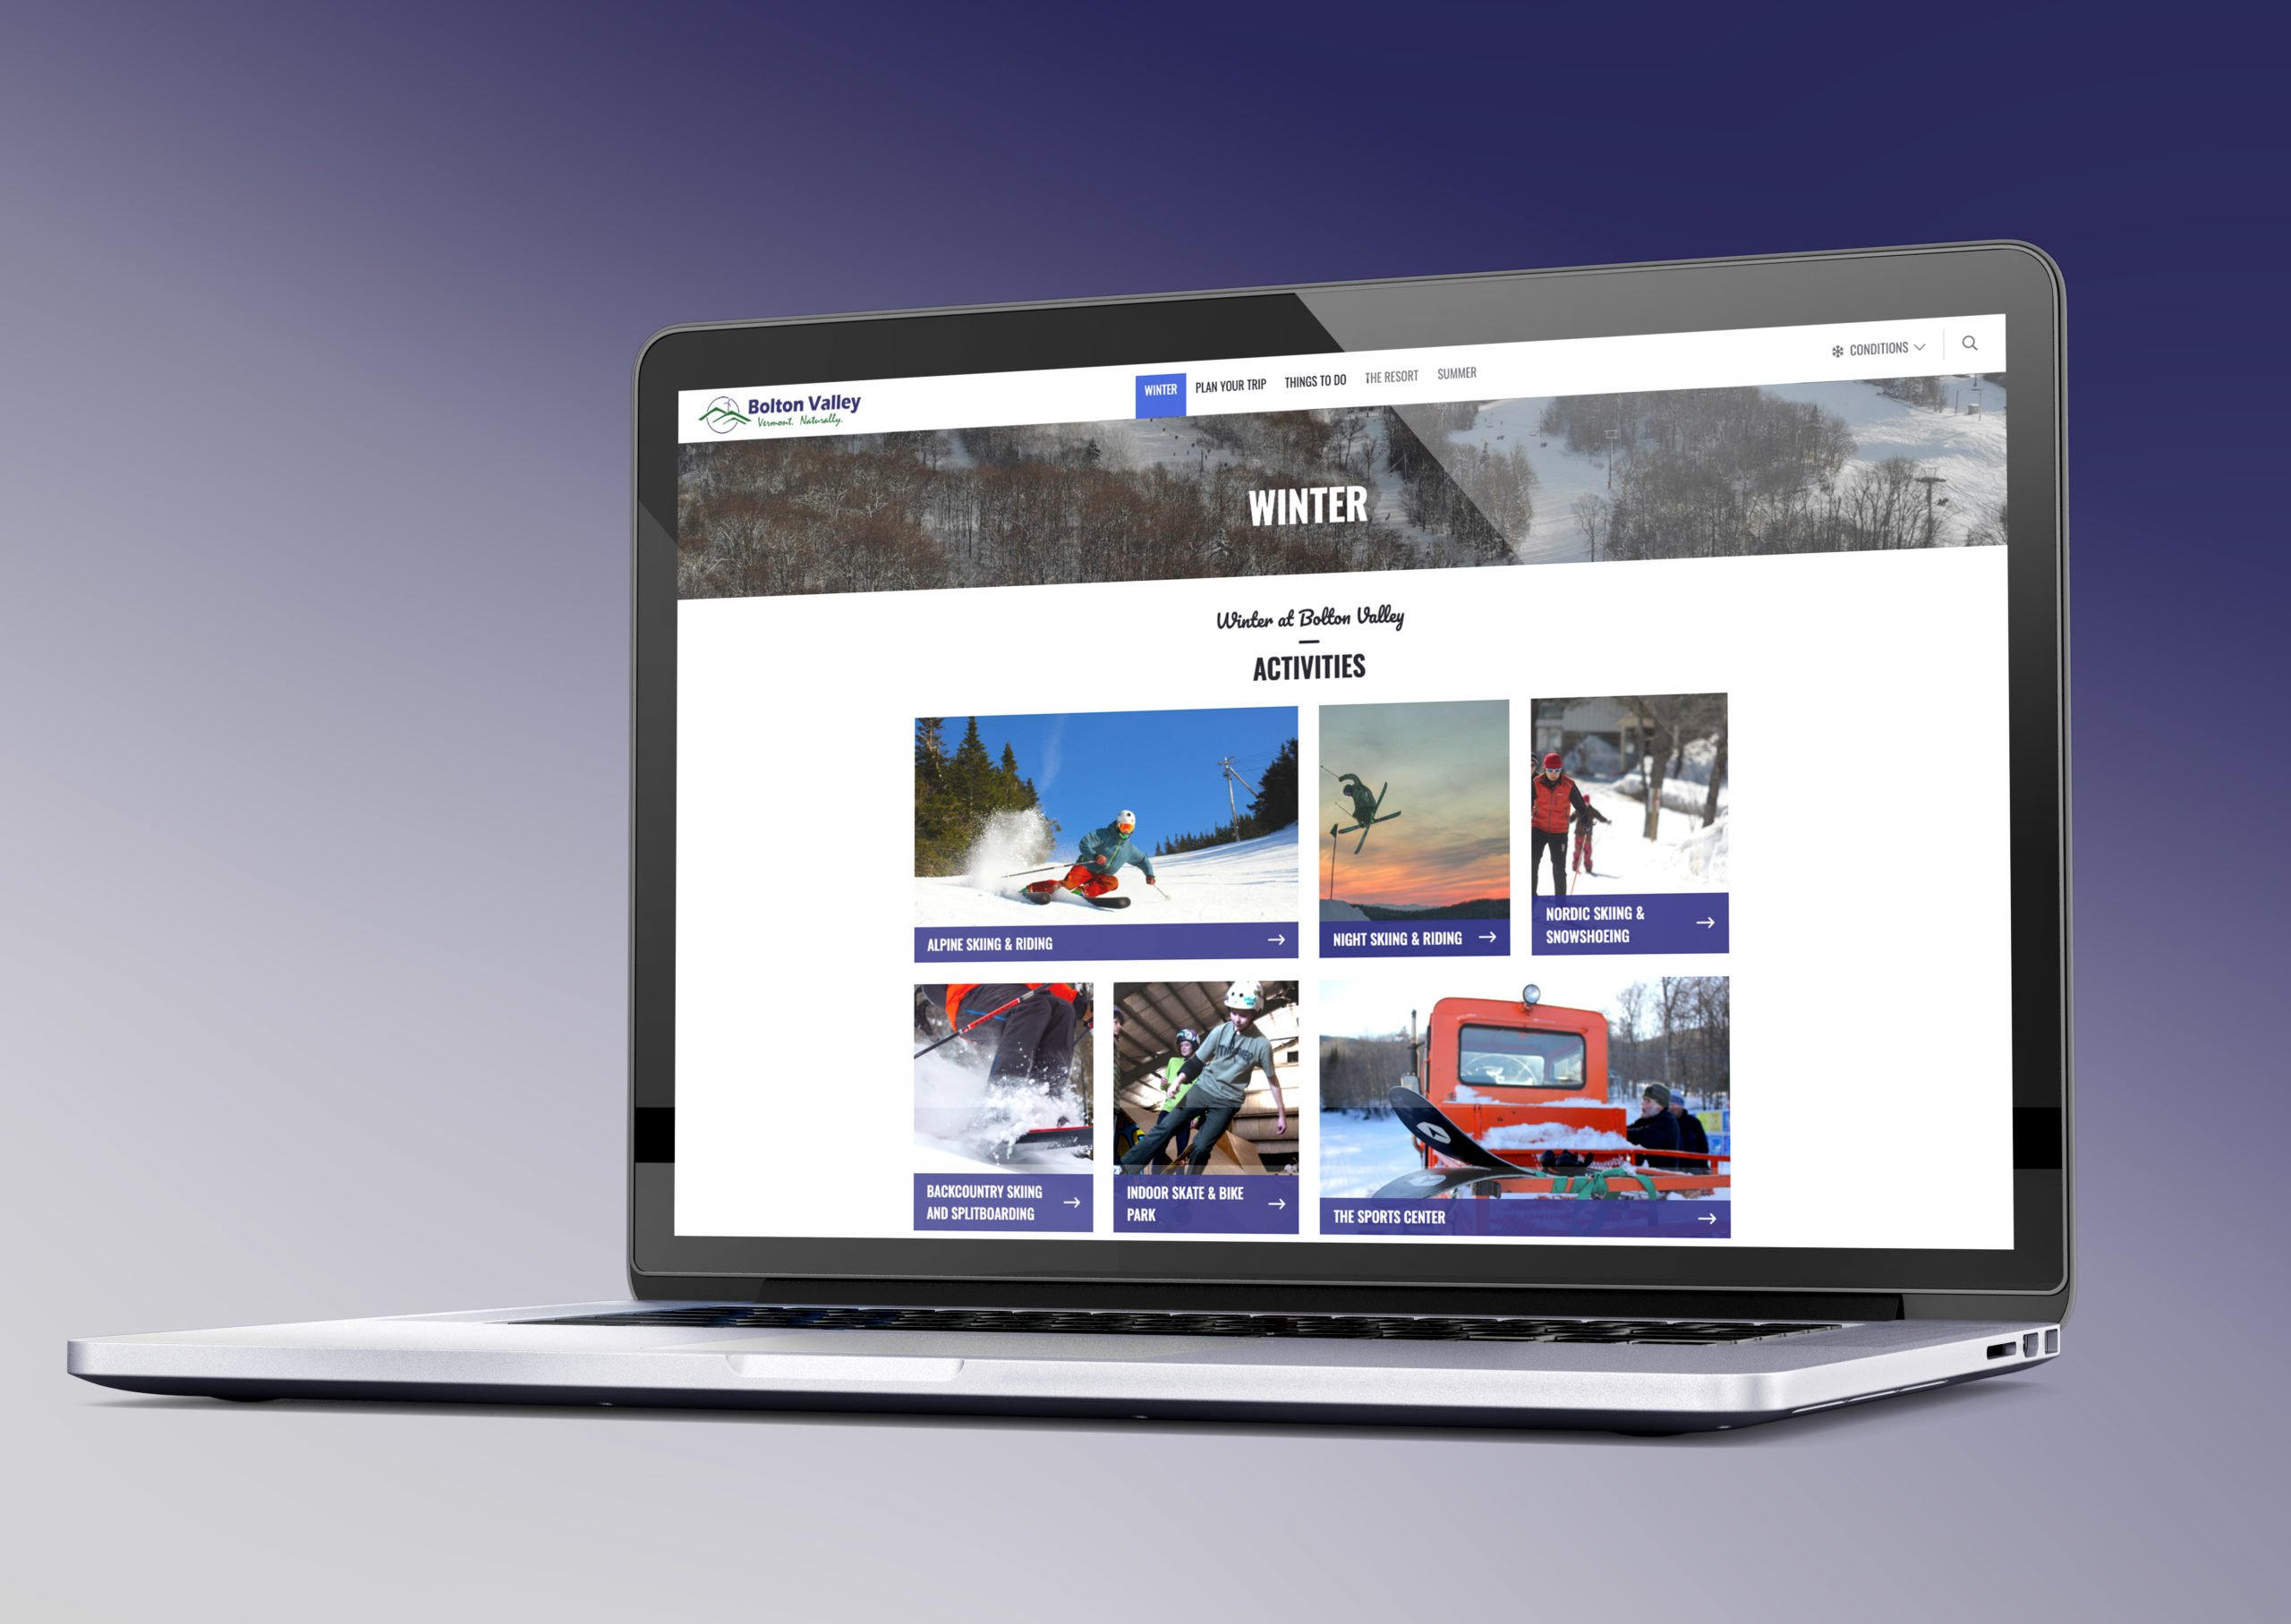 bolton valley winter activities page on a laptop